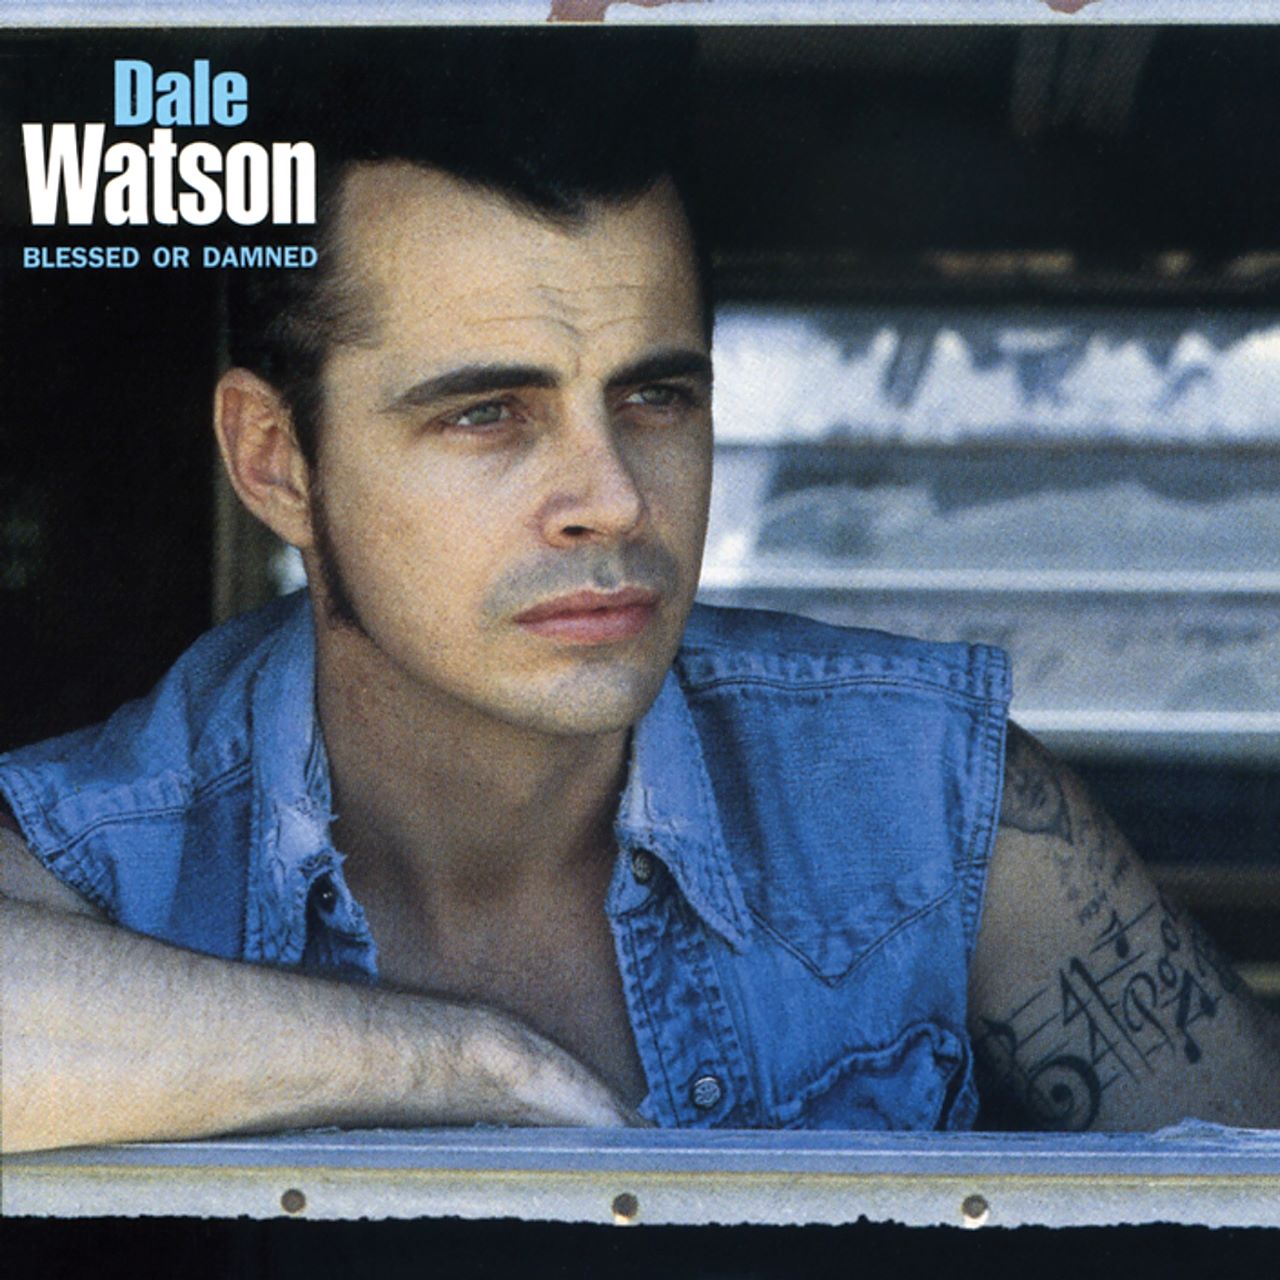 Dale Watson - Blessed Or Damned cover album